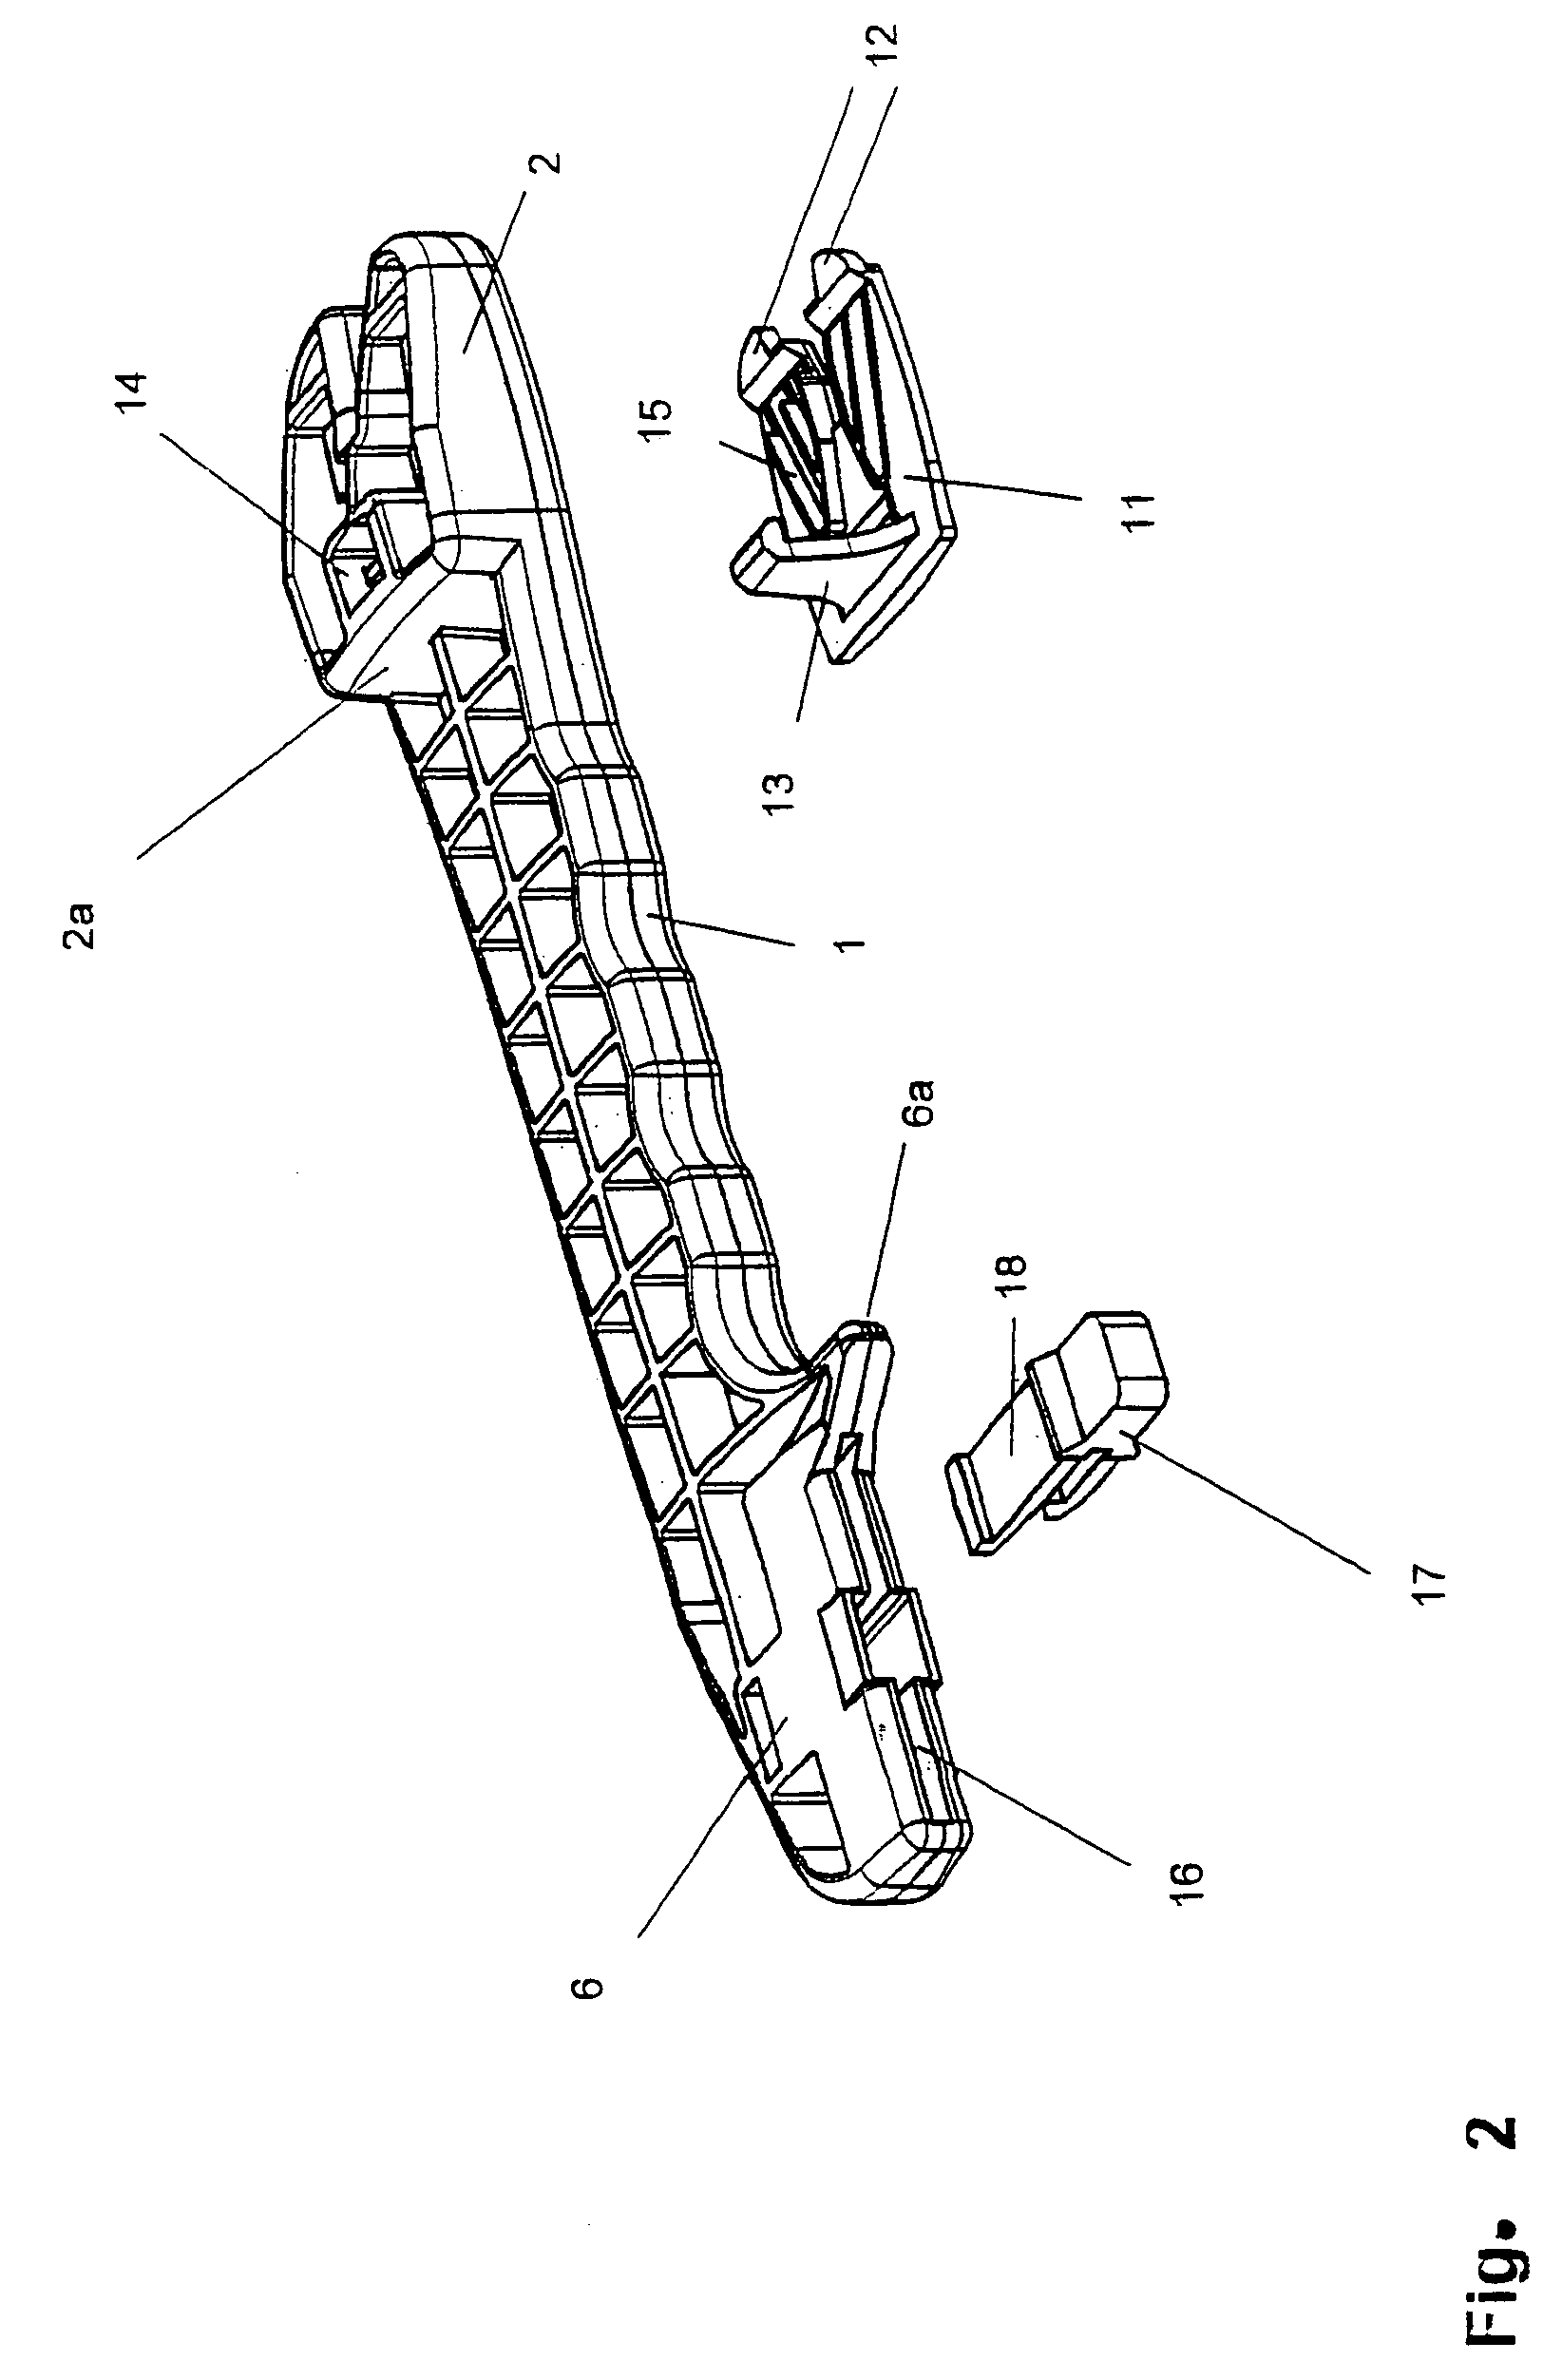 Device for manually sharpening knives and other blades, comprising interchangeably mounted hard metal plates